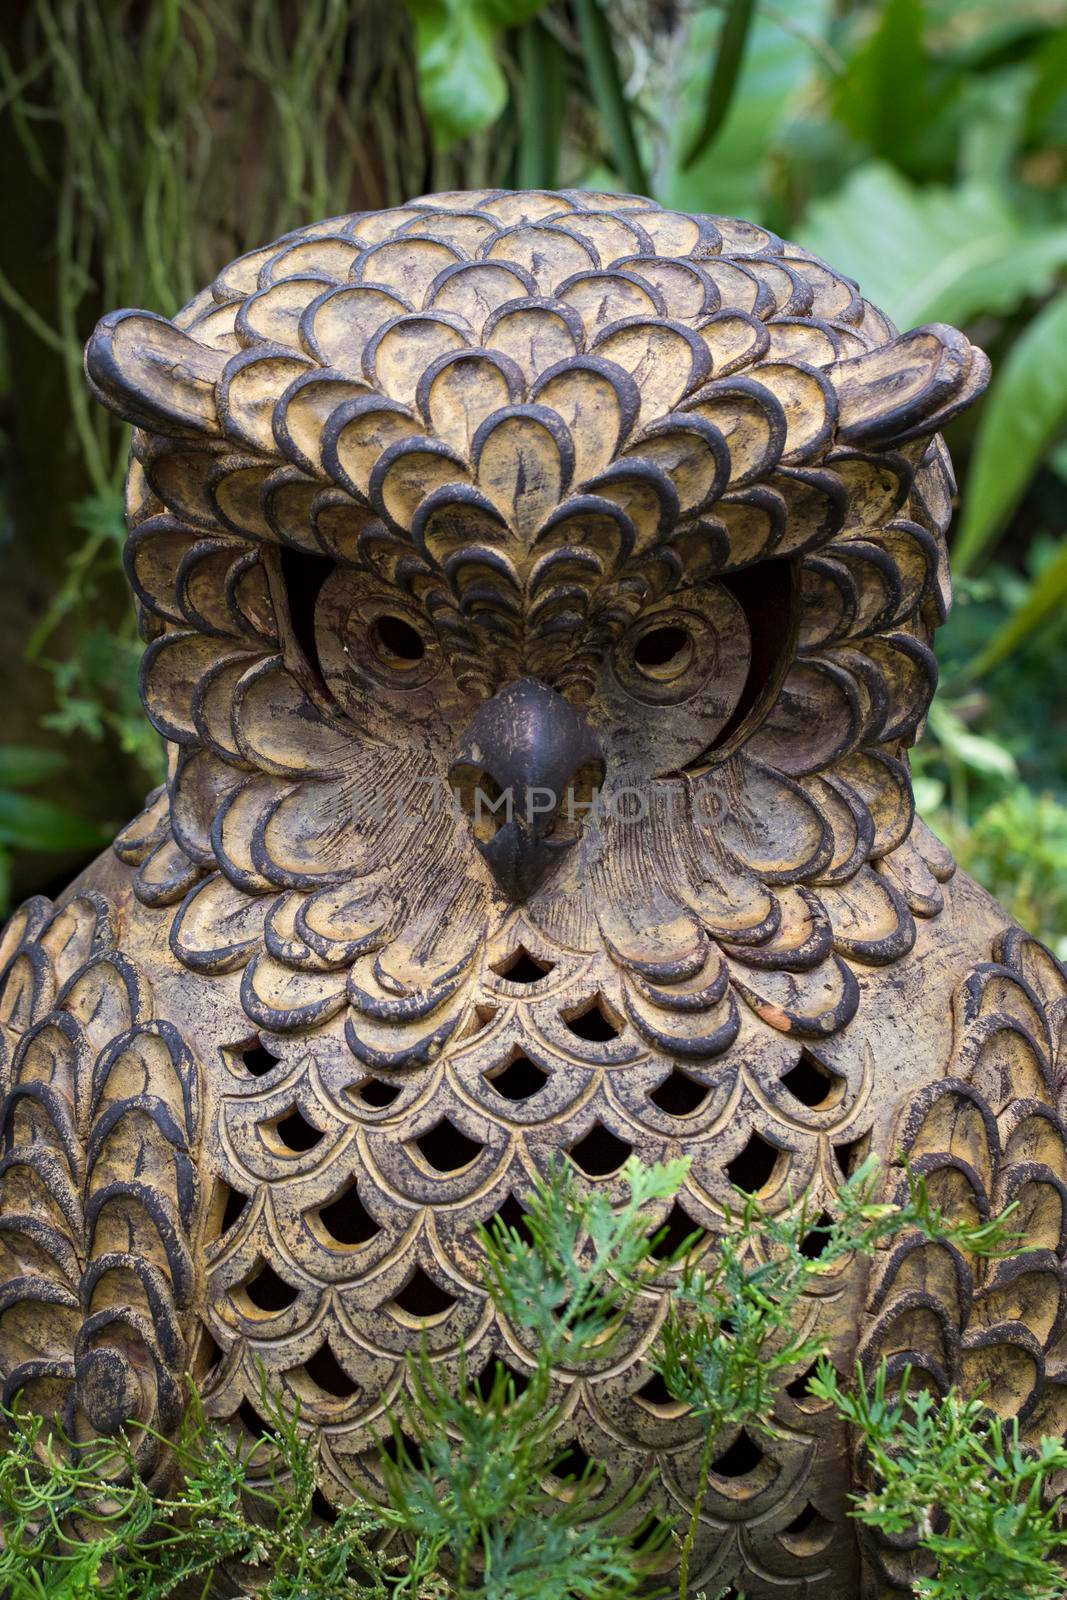  Statue of an owls on nature background. Art by yod67